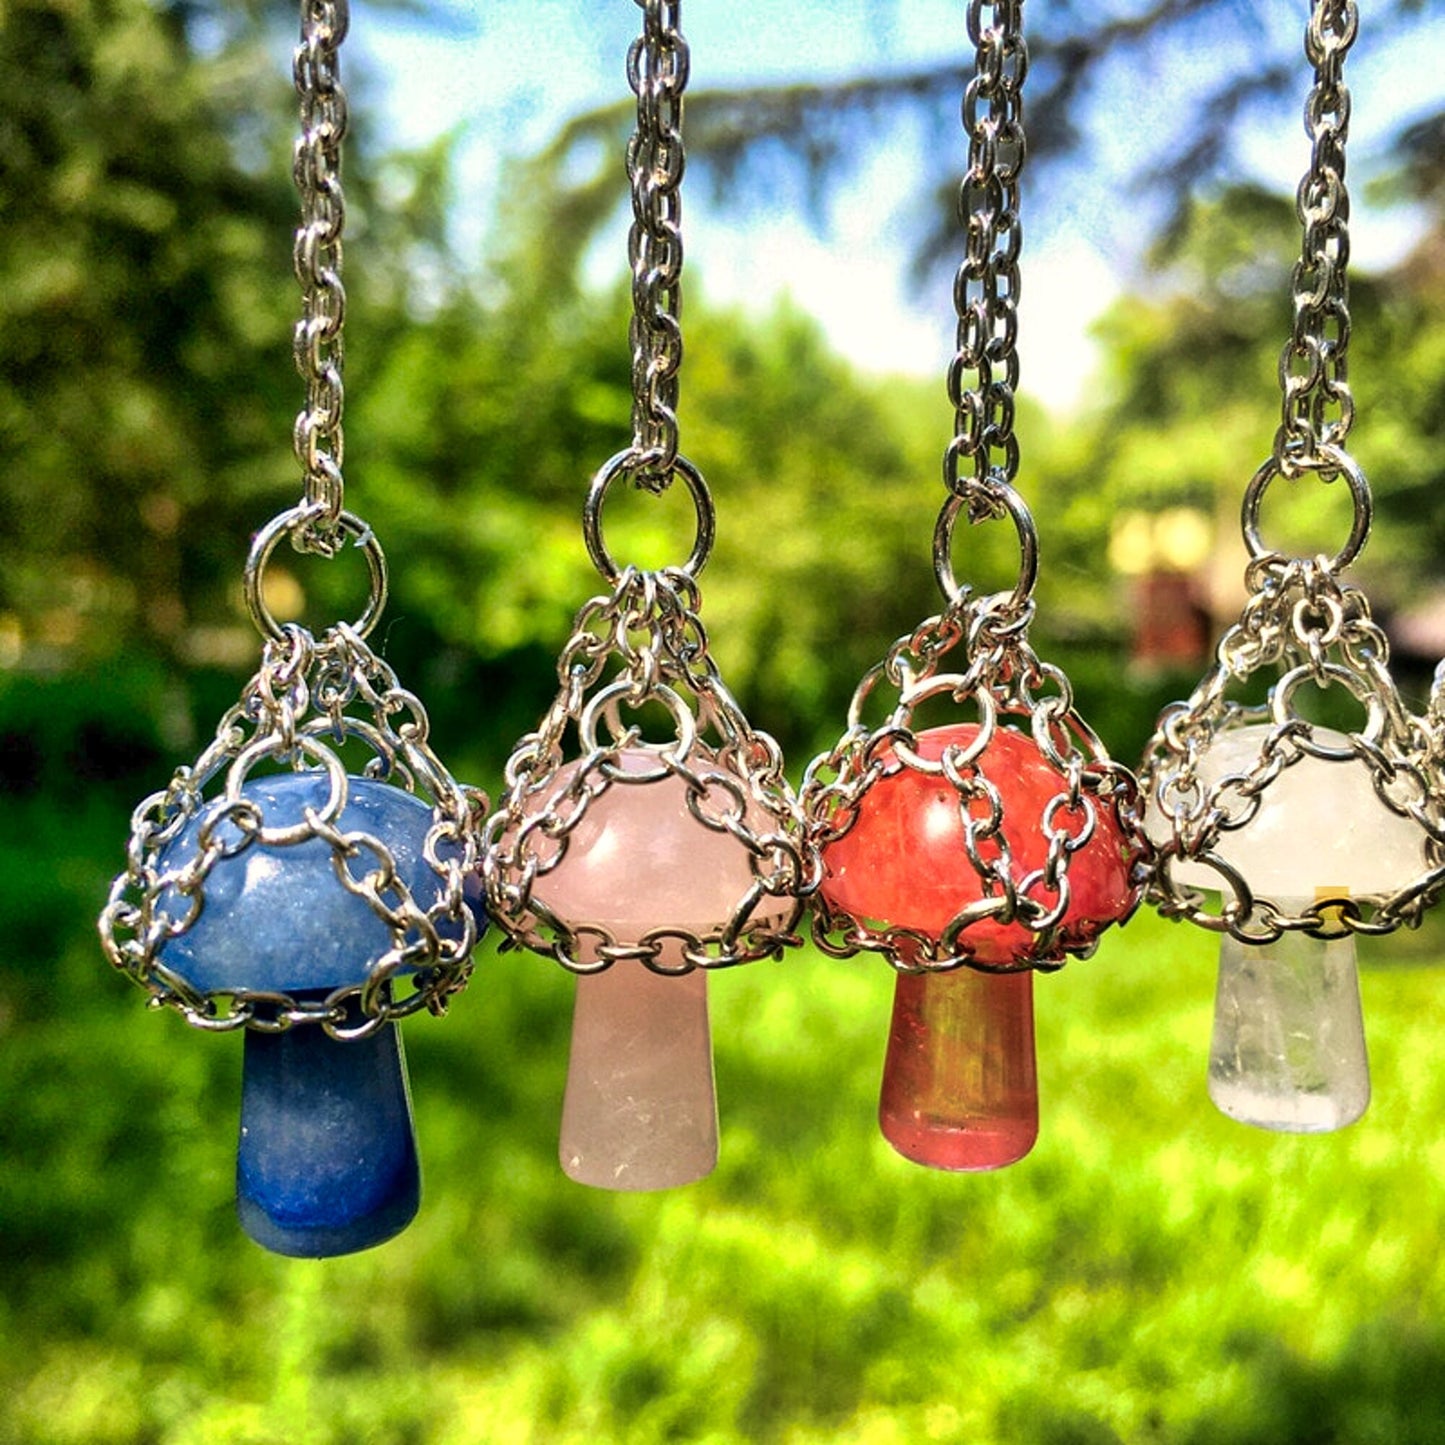 Handmade Natural Stone Crystal Mushroom Necklace for Healing - Wire Wrapped Necklace for Men and Women